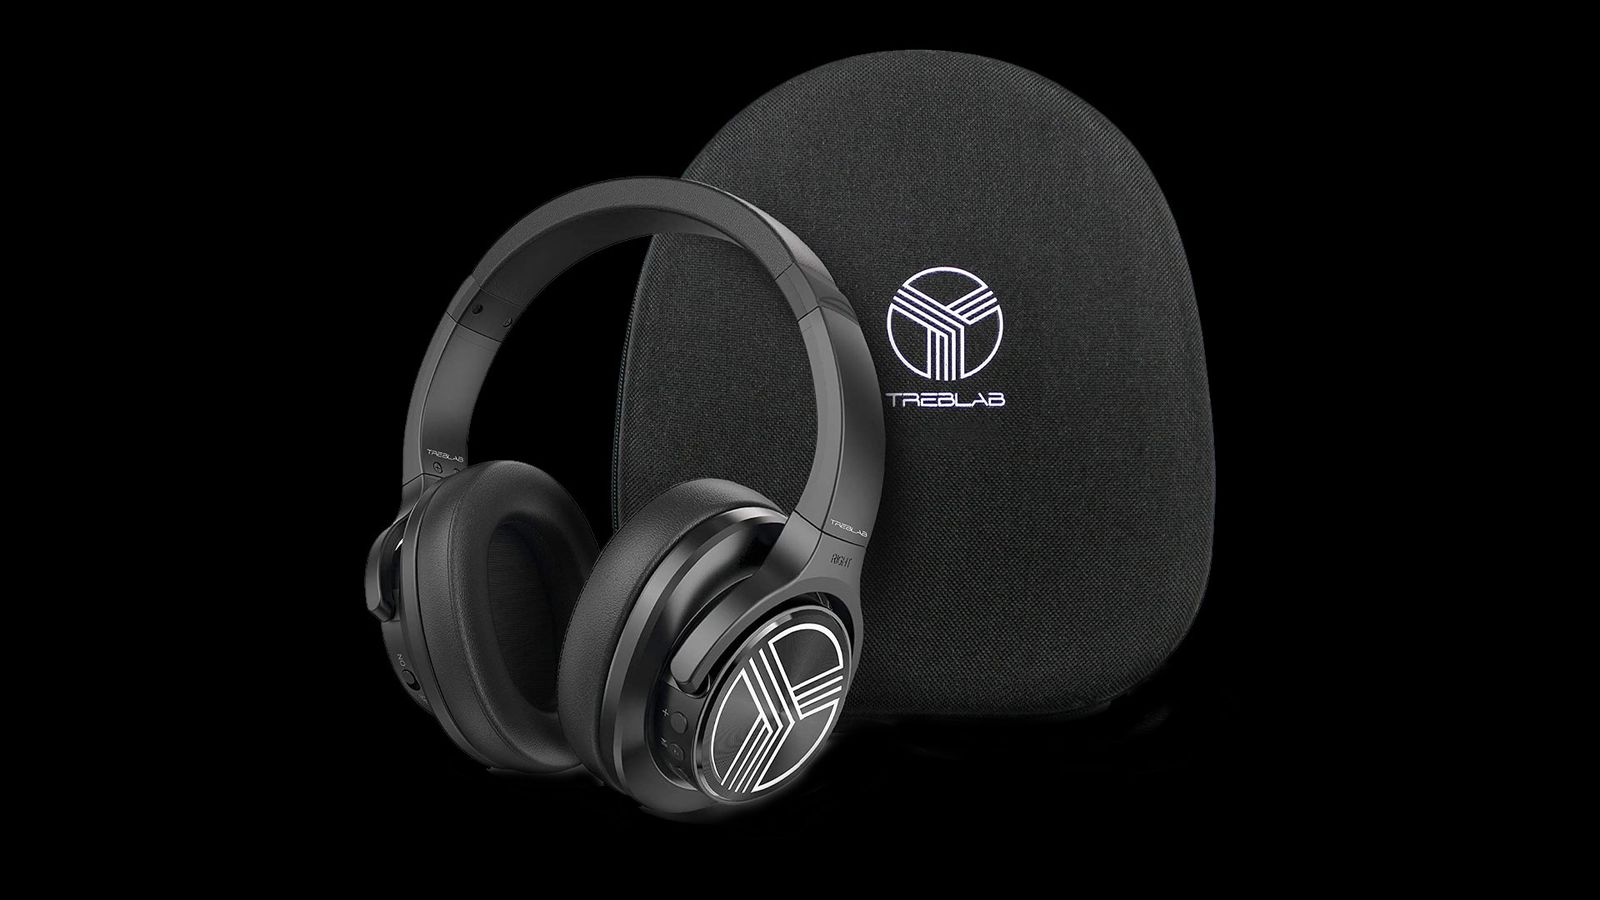 TREBLAB Z2 product image of a set of black over-ear headphones with case.